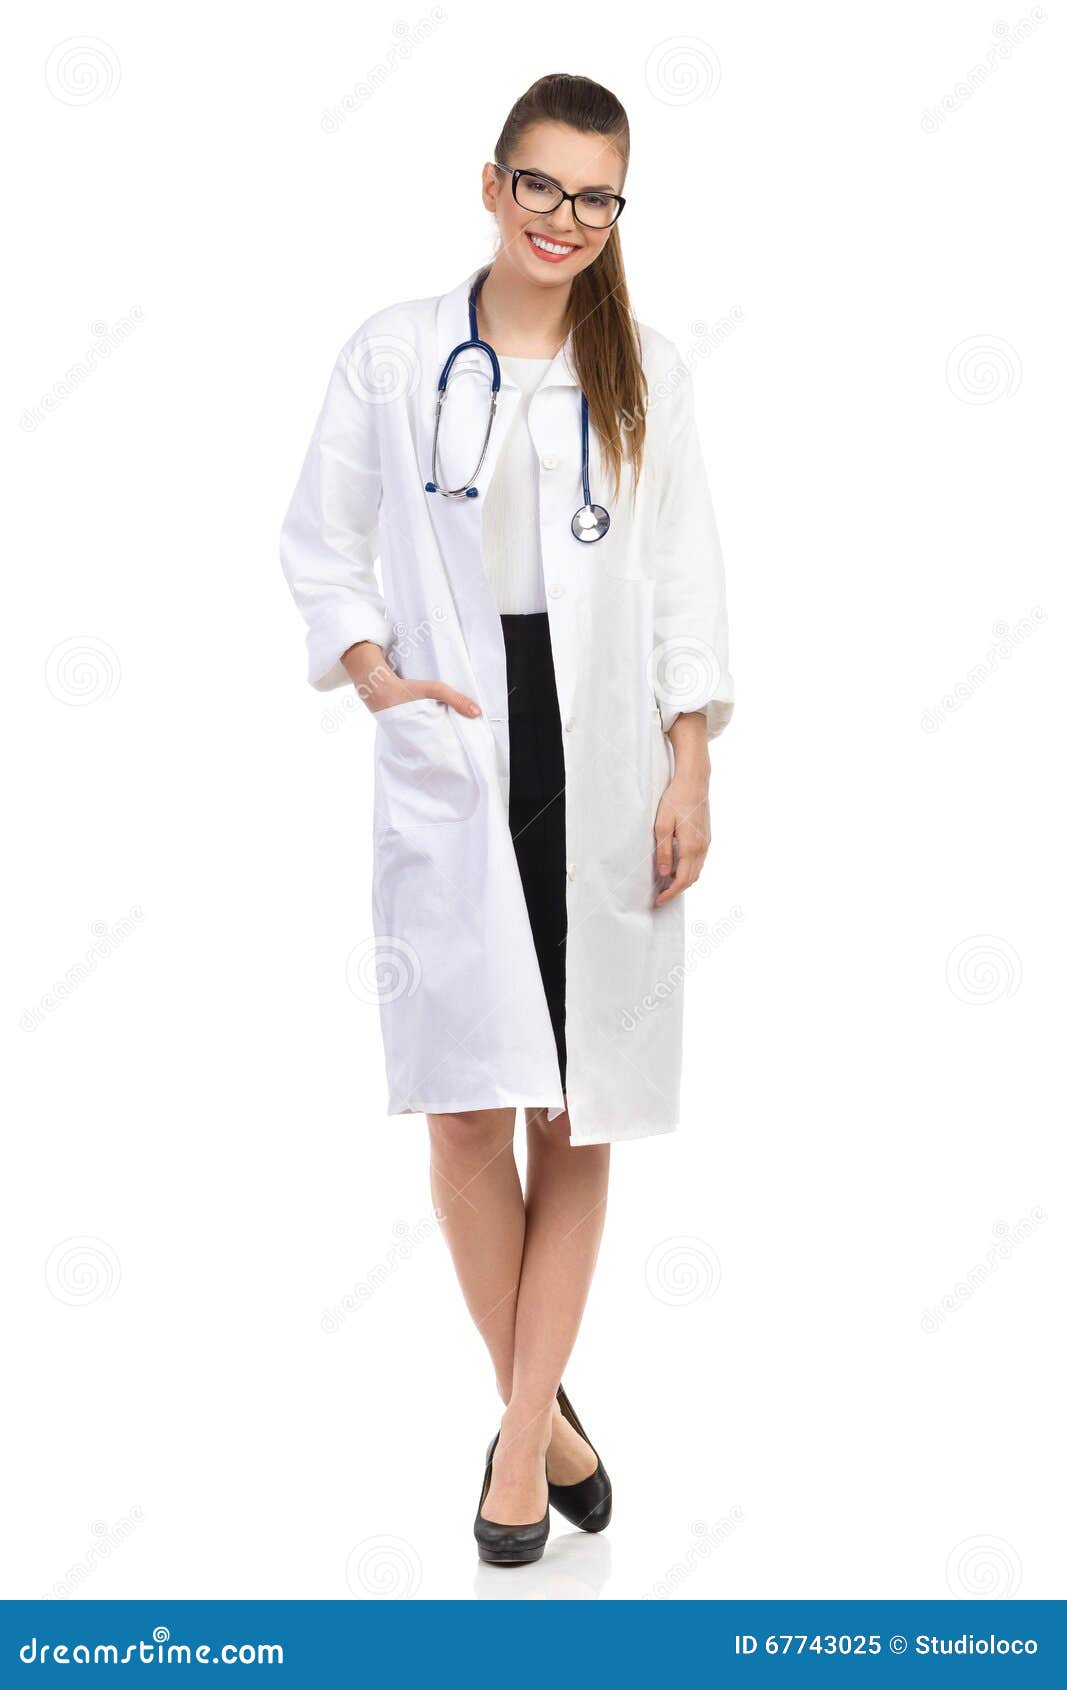 Young Female Doctor With Hand In Pocket Stock Photo - Image: 67743025